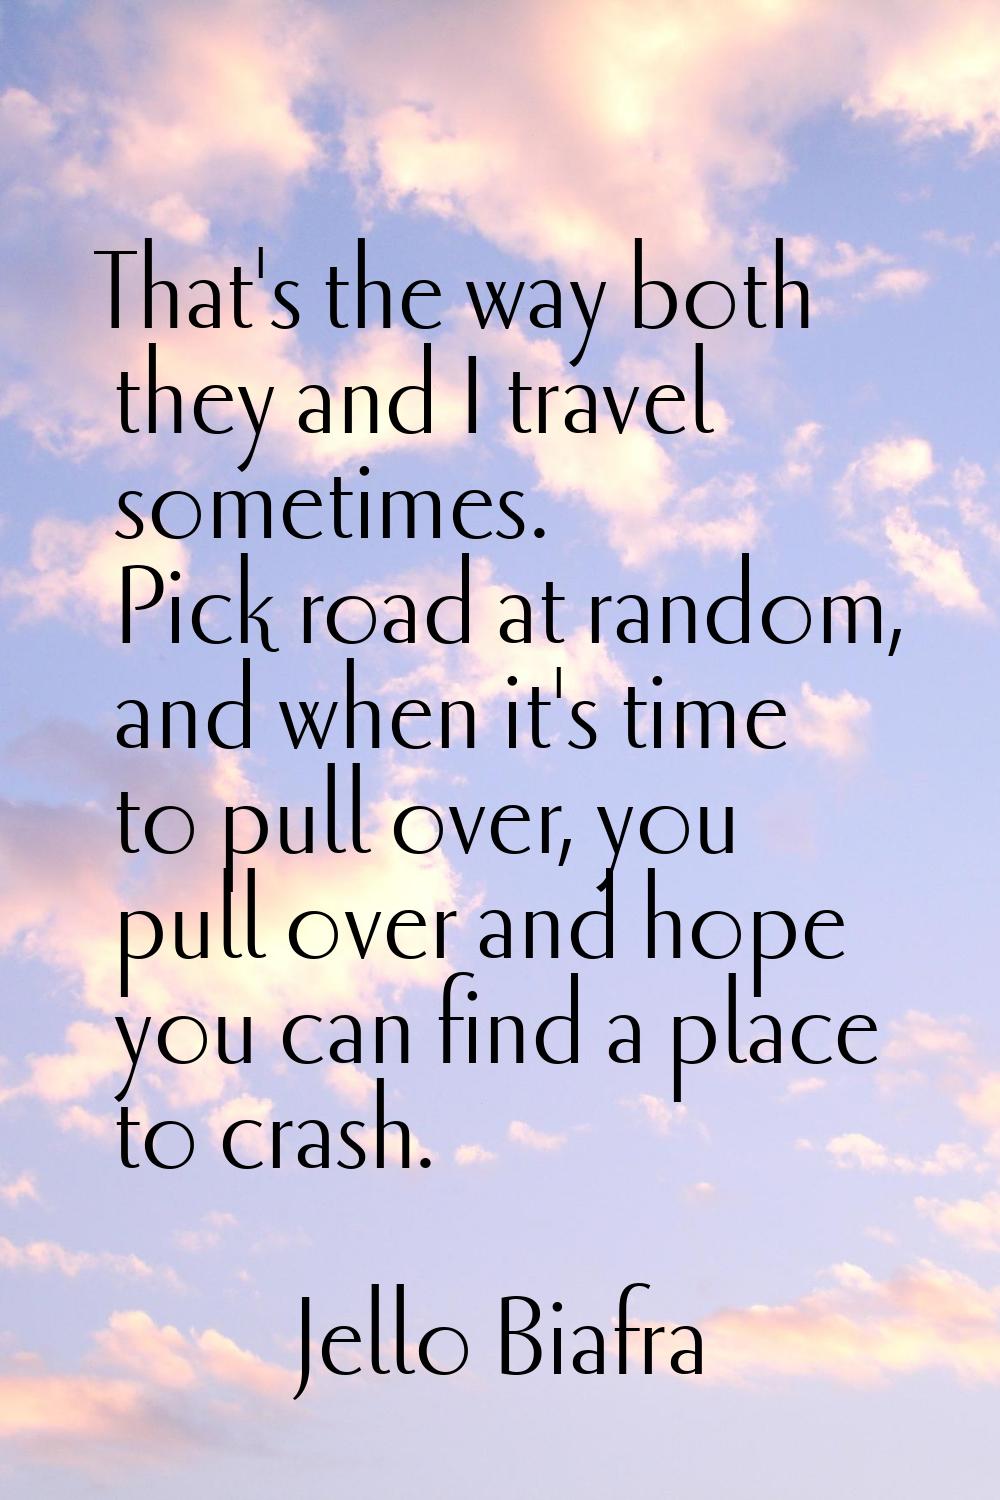 That's the way both they and I travel sometimes. Pick road at random, and when it's time to pull ov